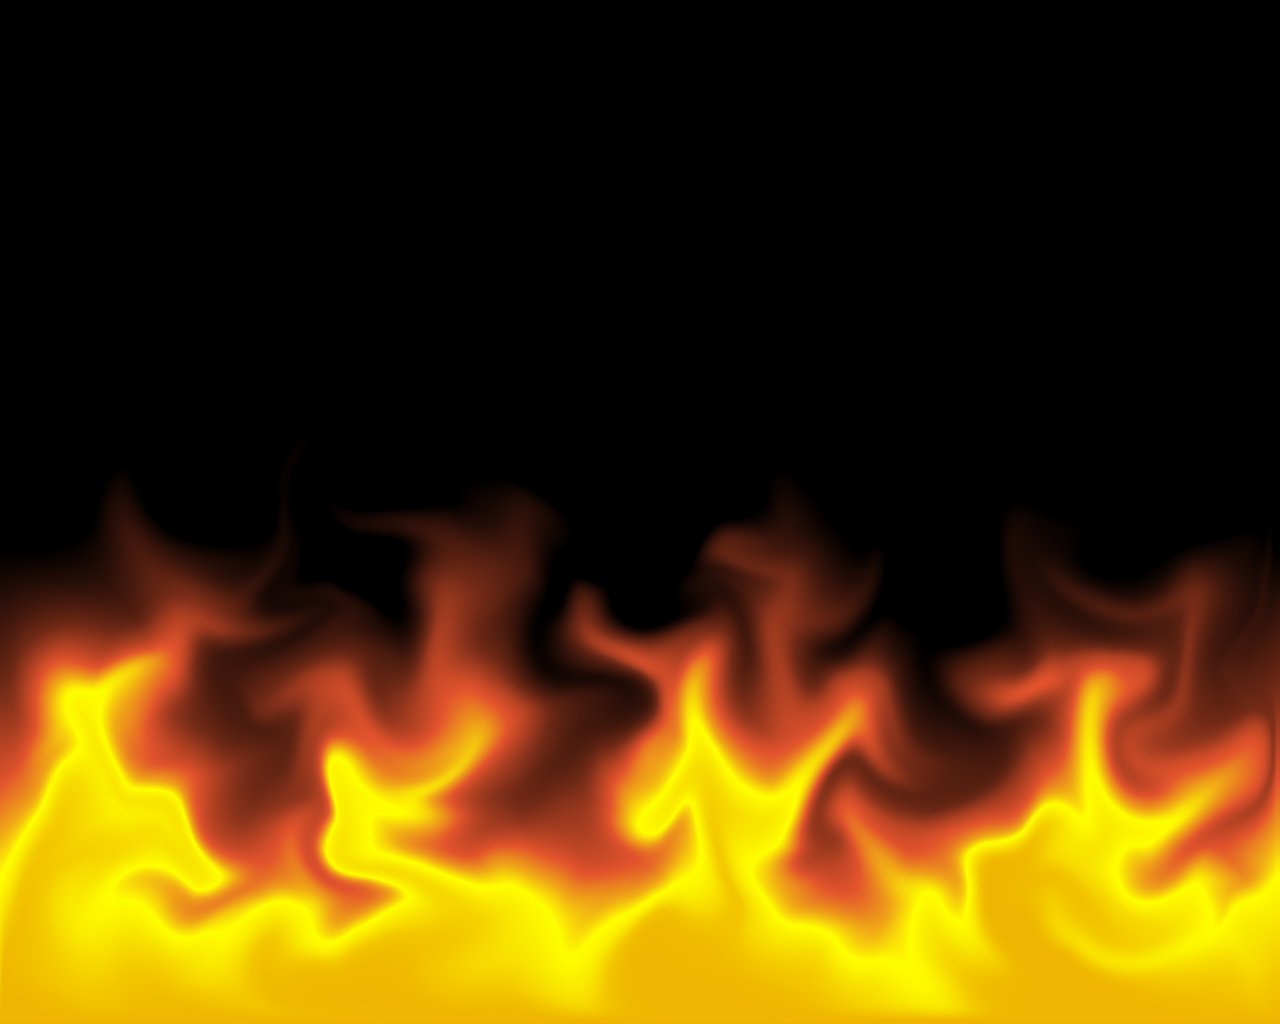 Flame Wave backgrounds